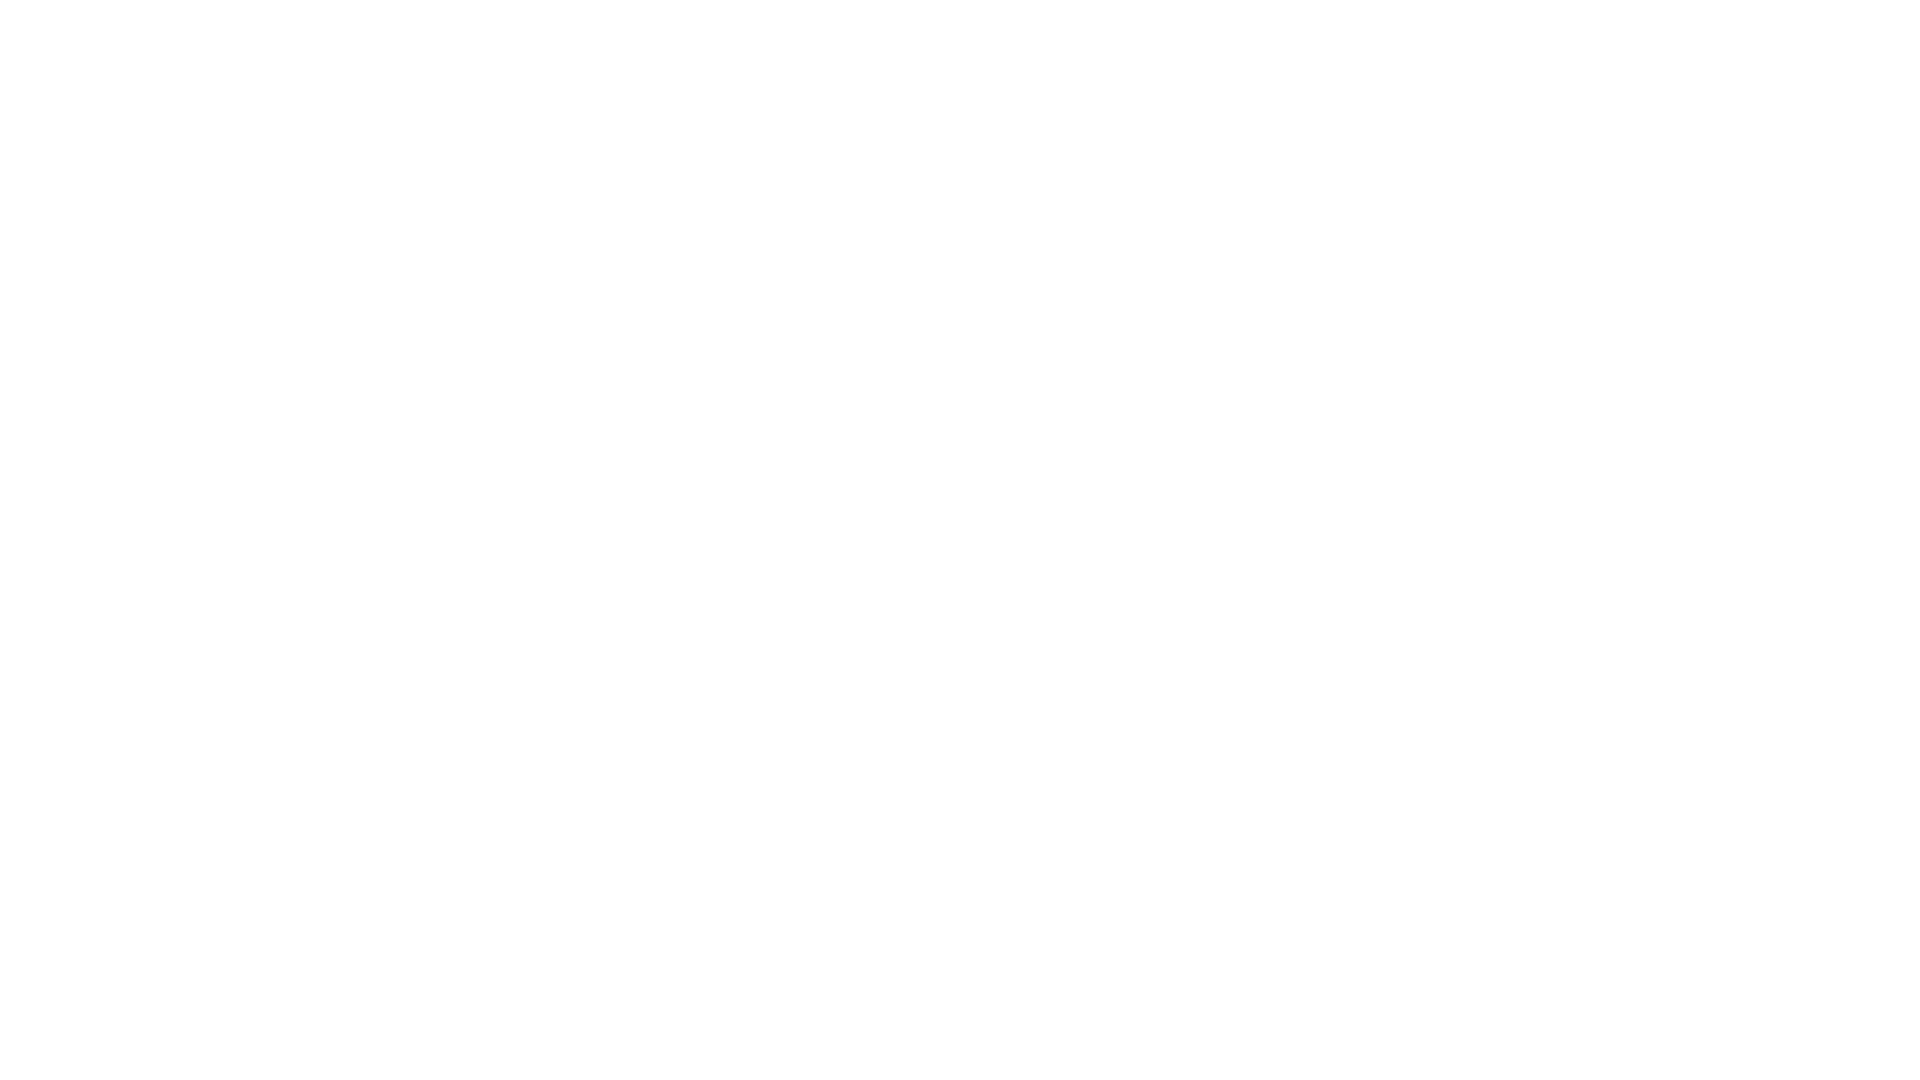 CLVR logo, Basic outline of a VR headset with the letters CLVR inside the outline